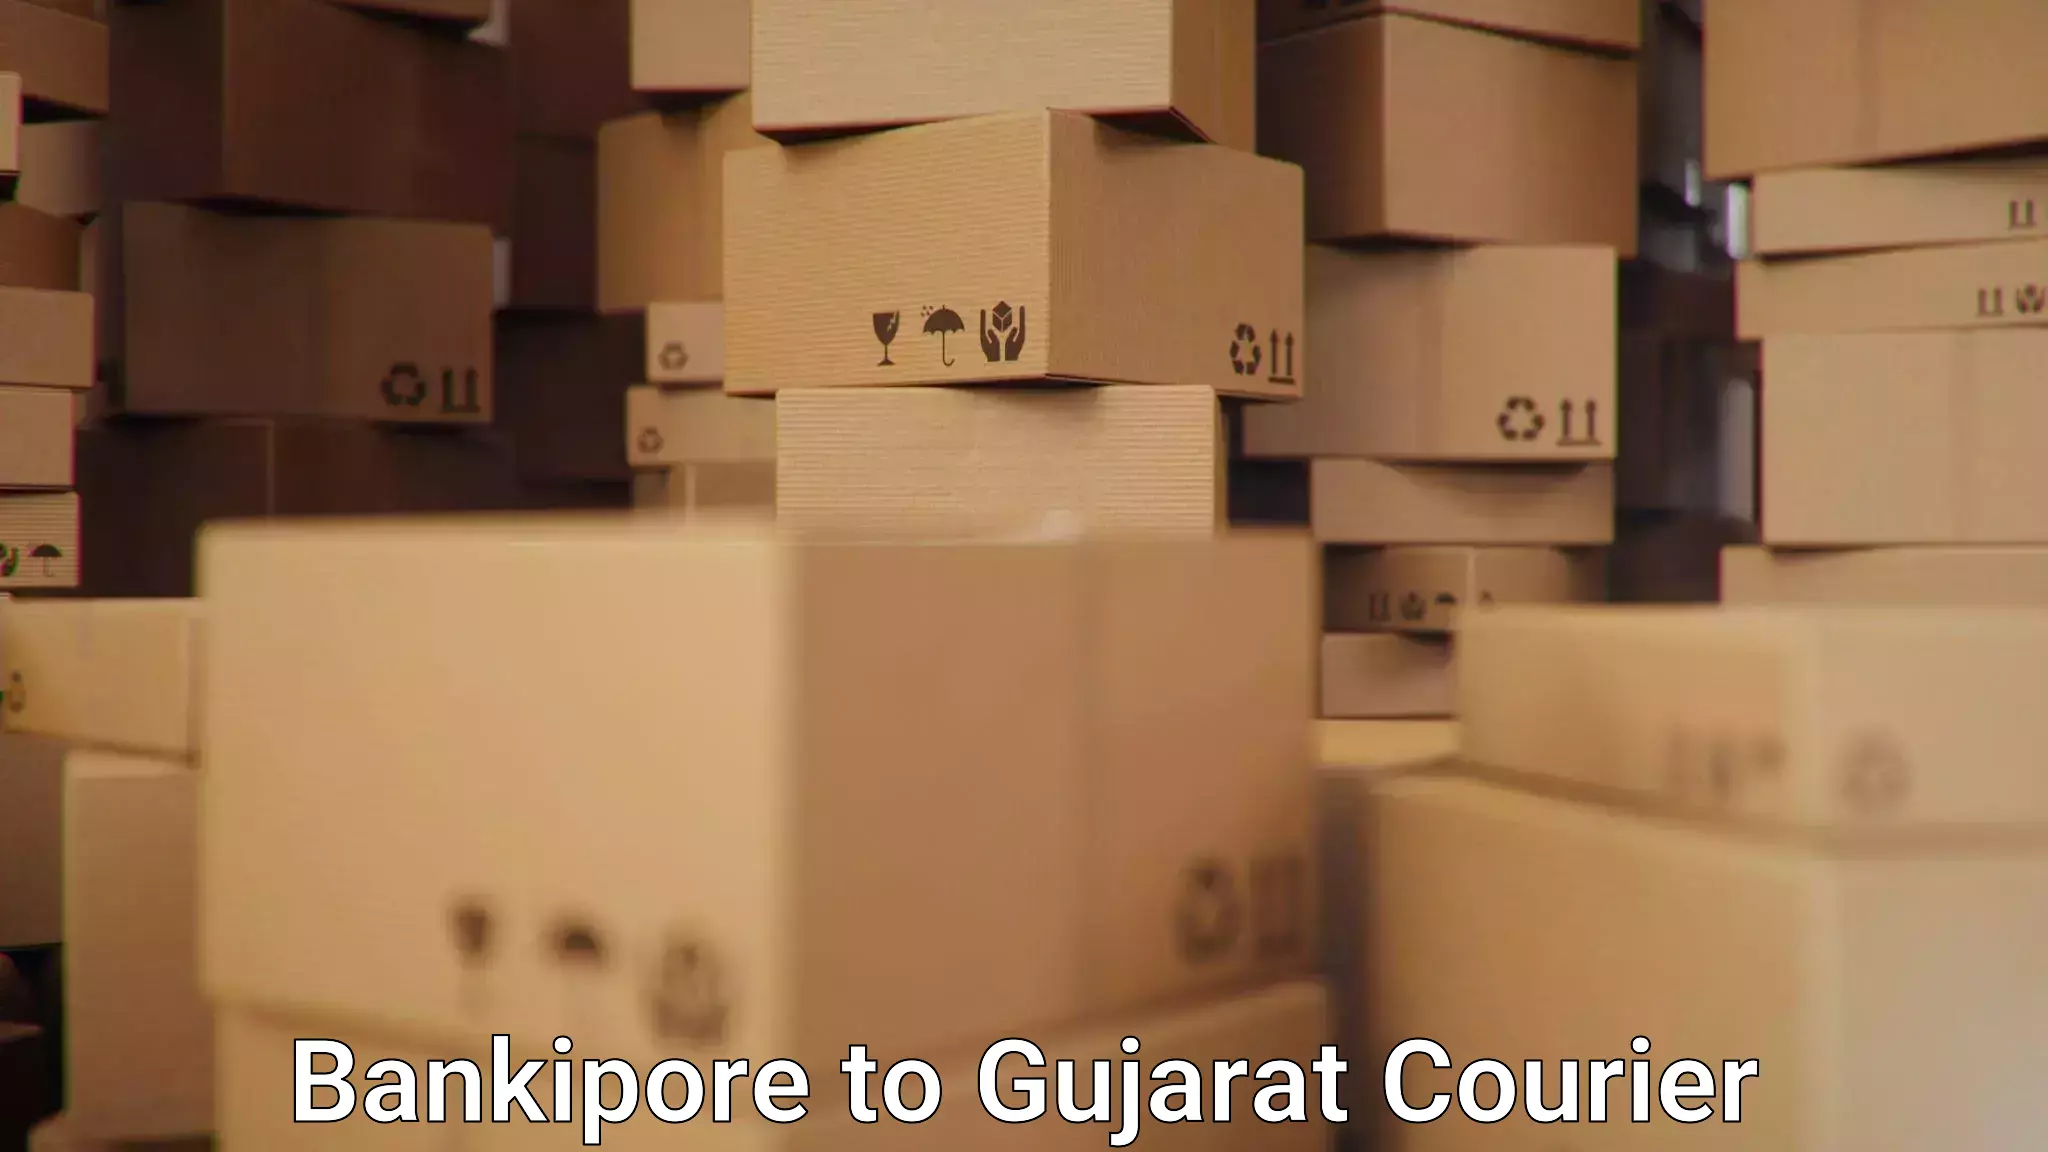 Courier service comparison in Bankipore to Palitana